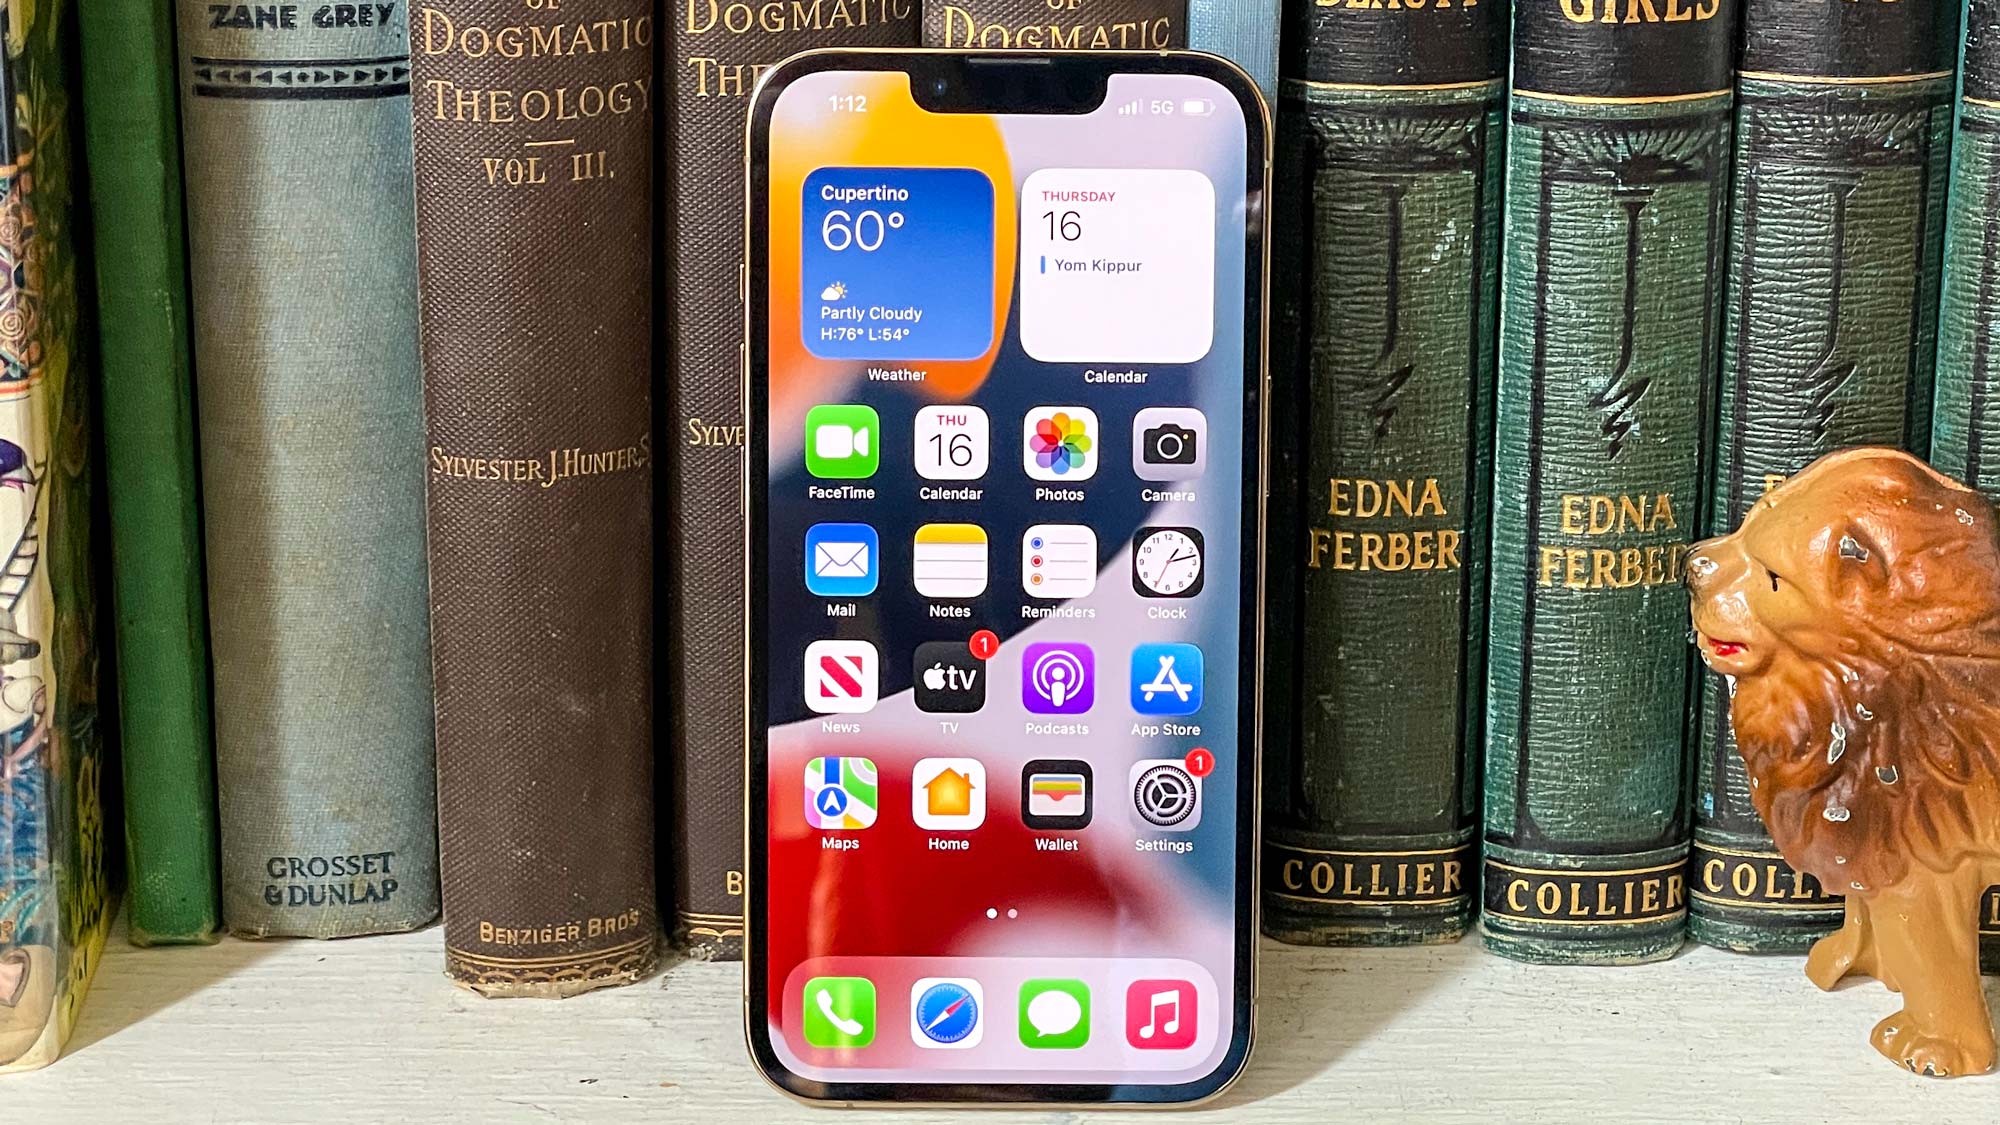 iphone 13 pro display on leaning against books